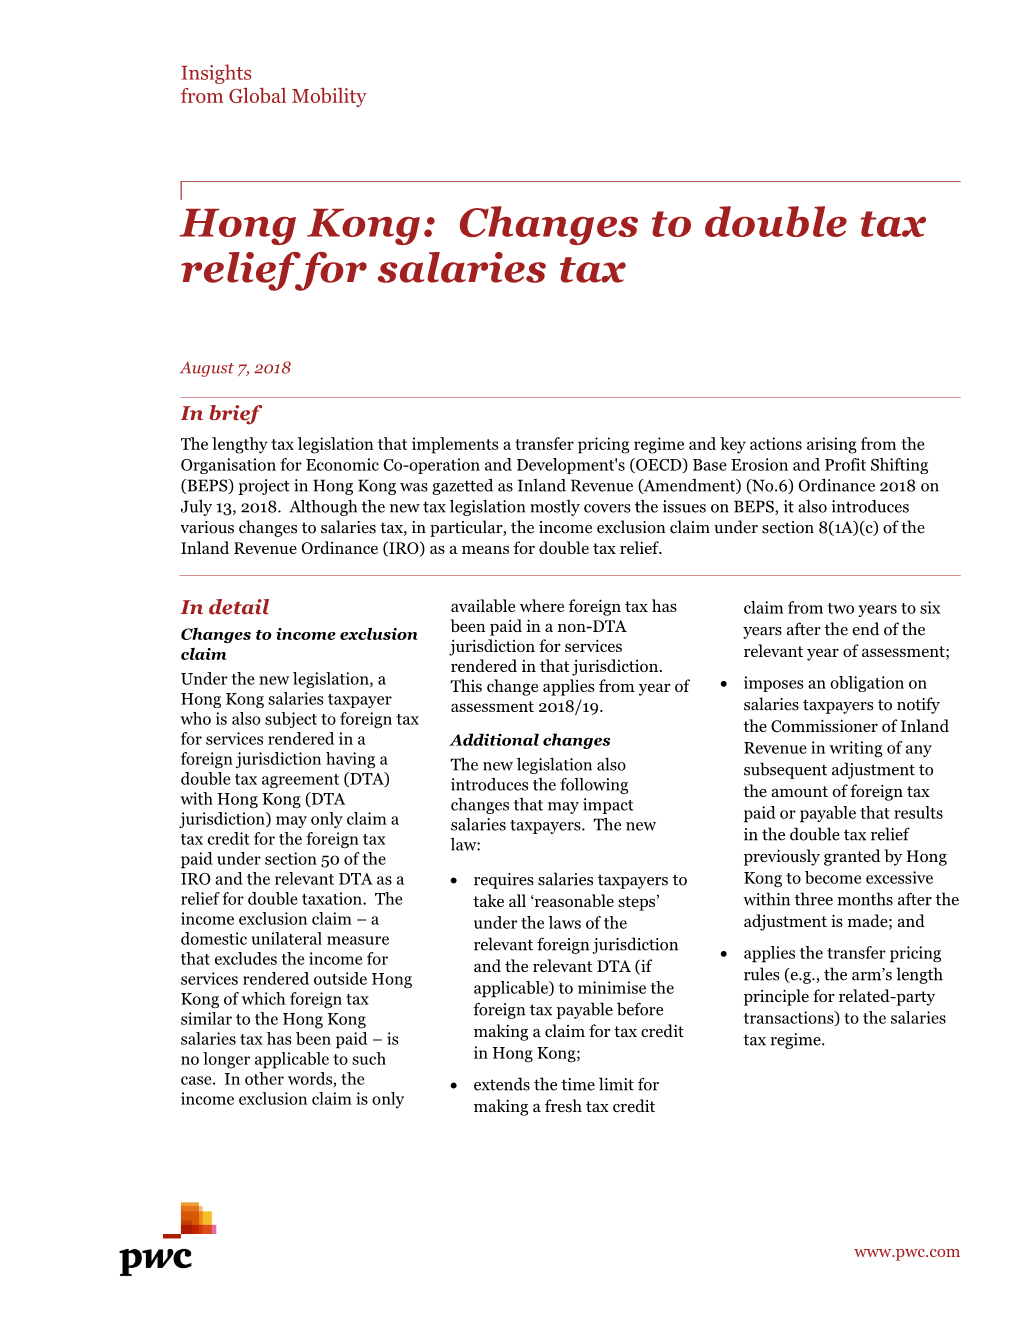 Hong Kong: Changes to Double Tax Relief for Salaries